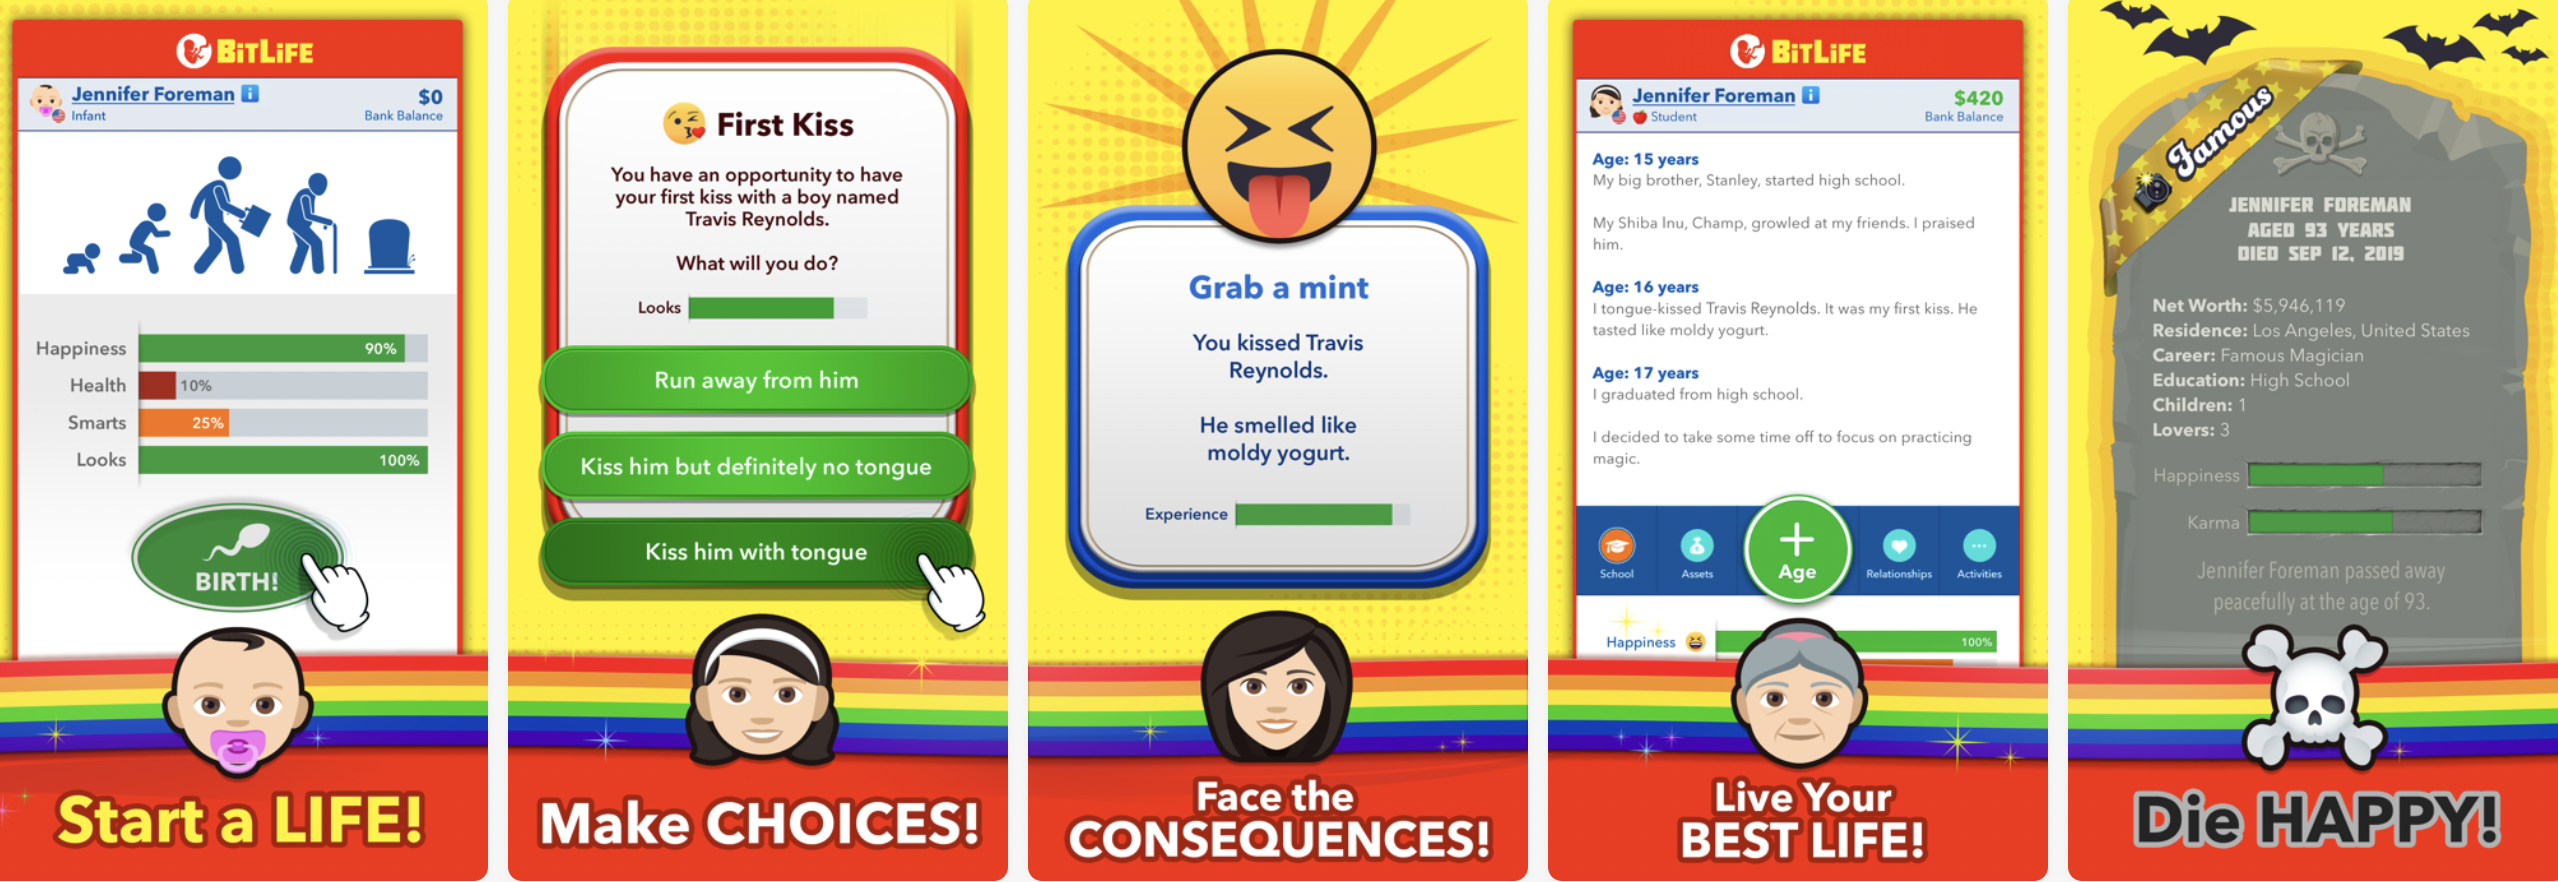 BitLife - Life Simulator Hack Game on iPhone and iPad - FREE